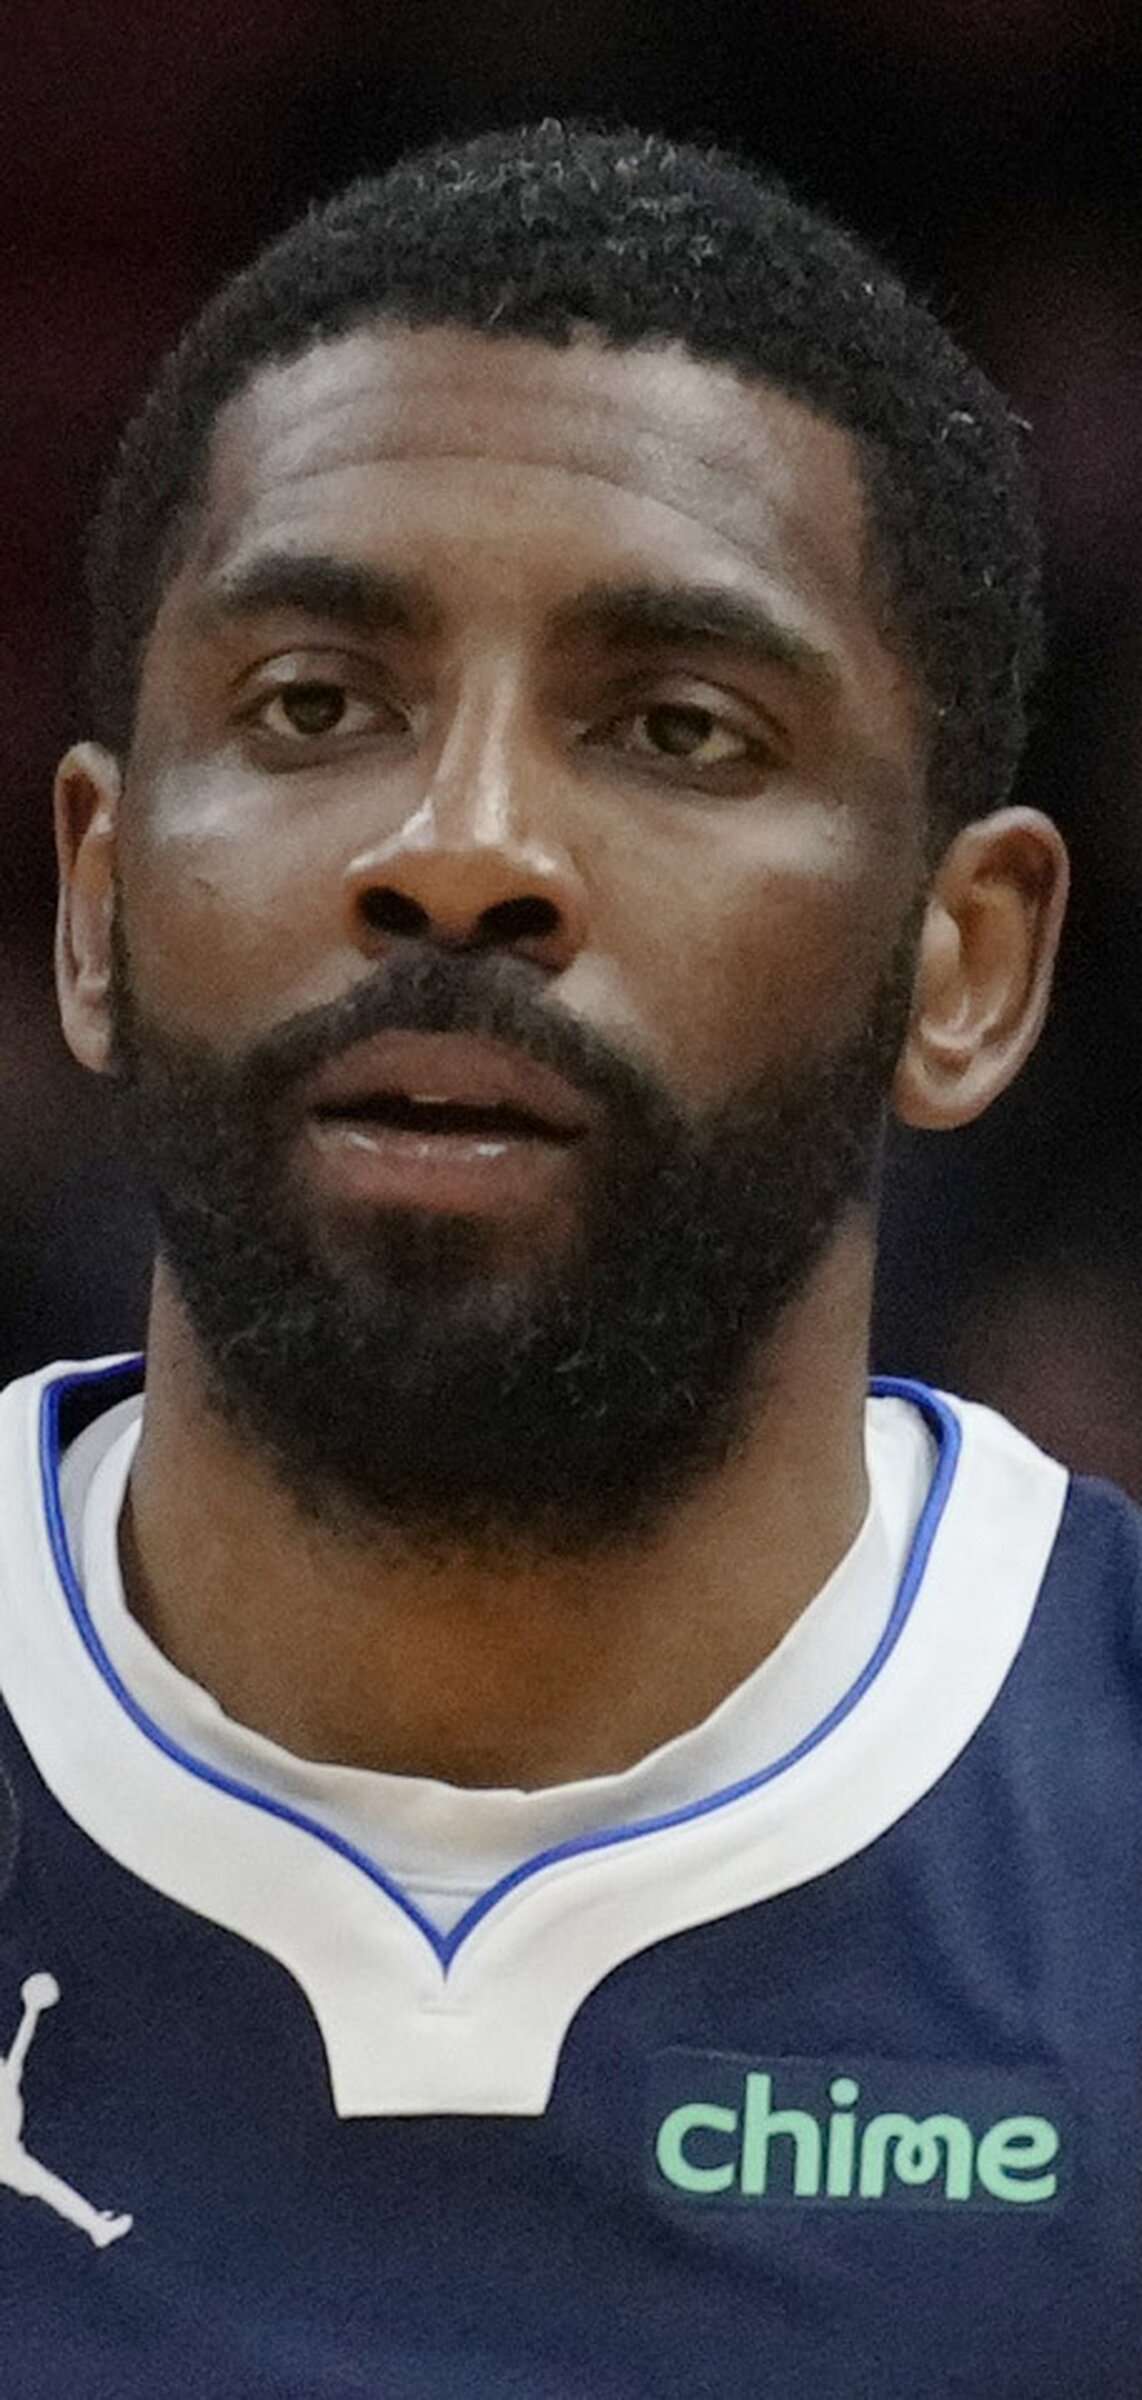 Mavs' Cuban says keeping Irving is priority, supports Kidd